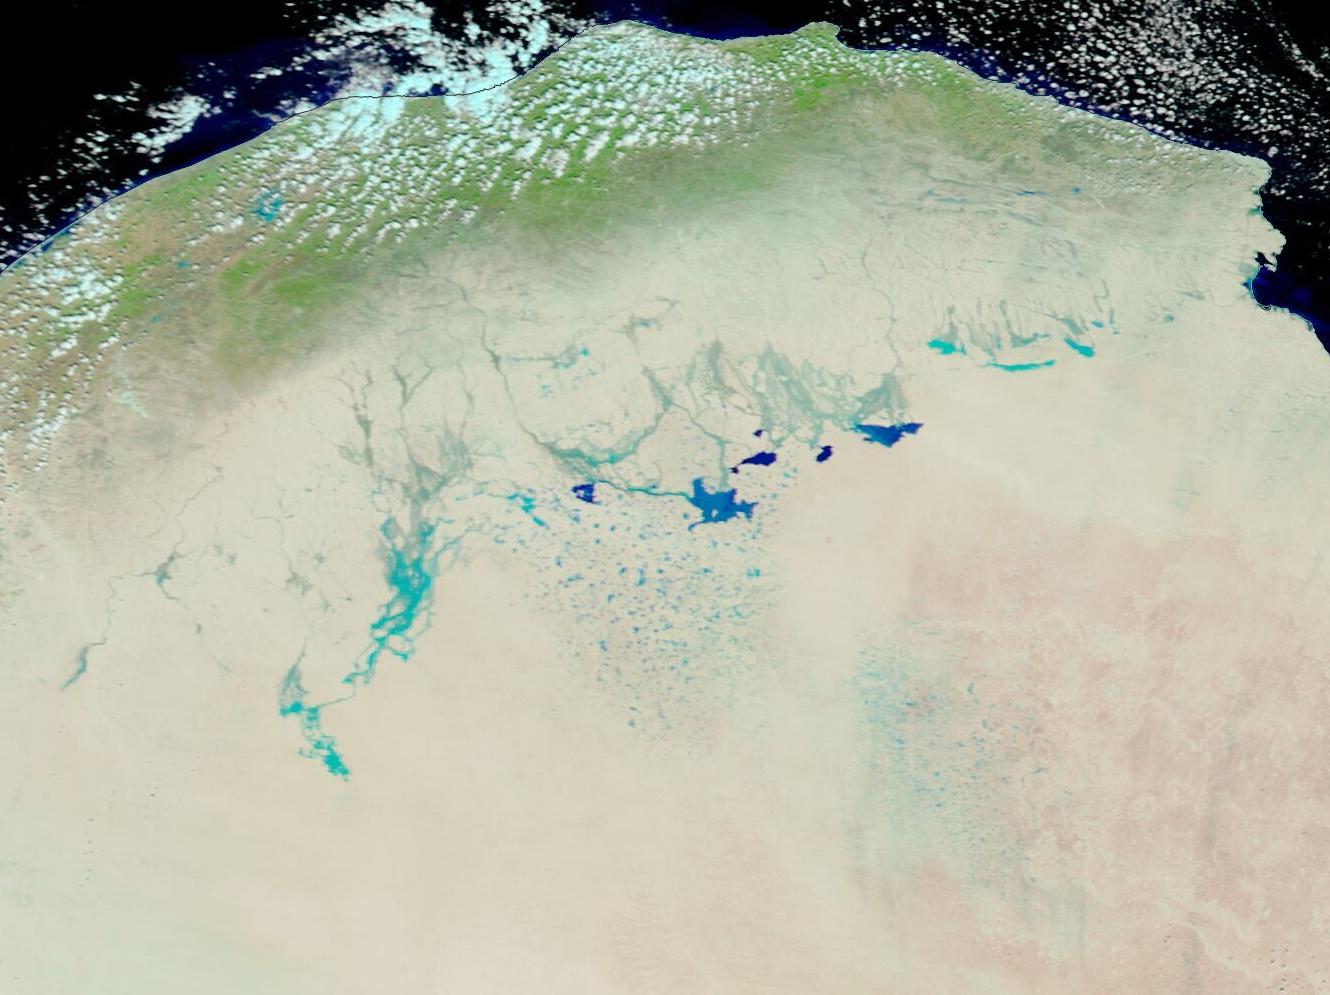 A satellite image of northeastern Libya after a severe storm left major water deposits seen throughout the natural map.